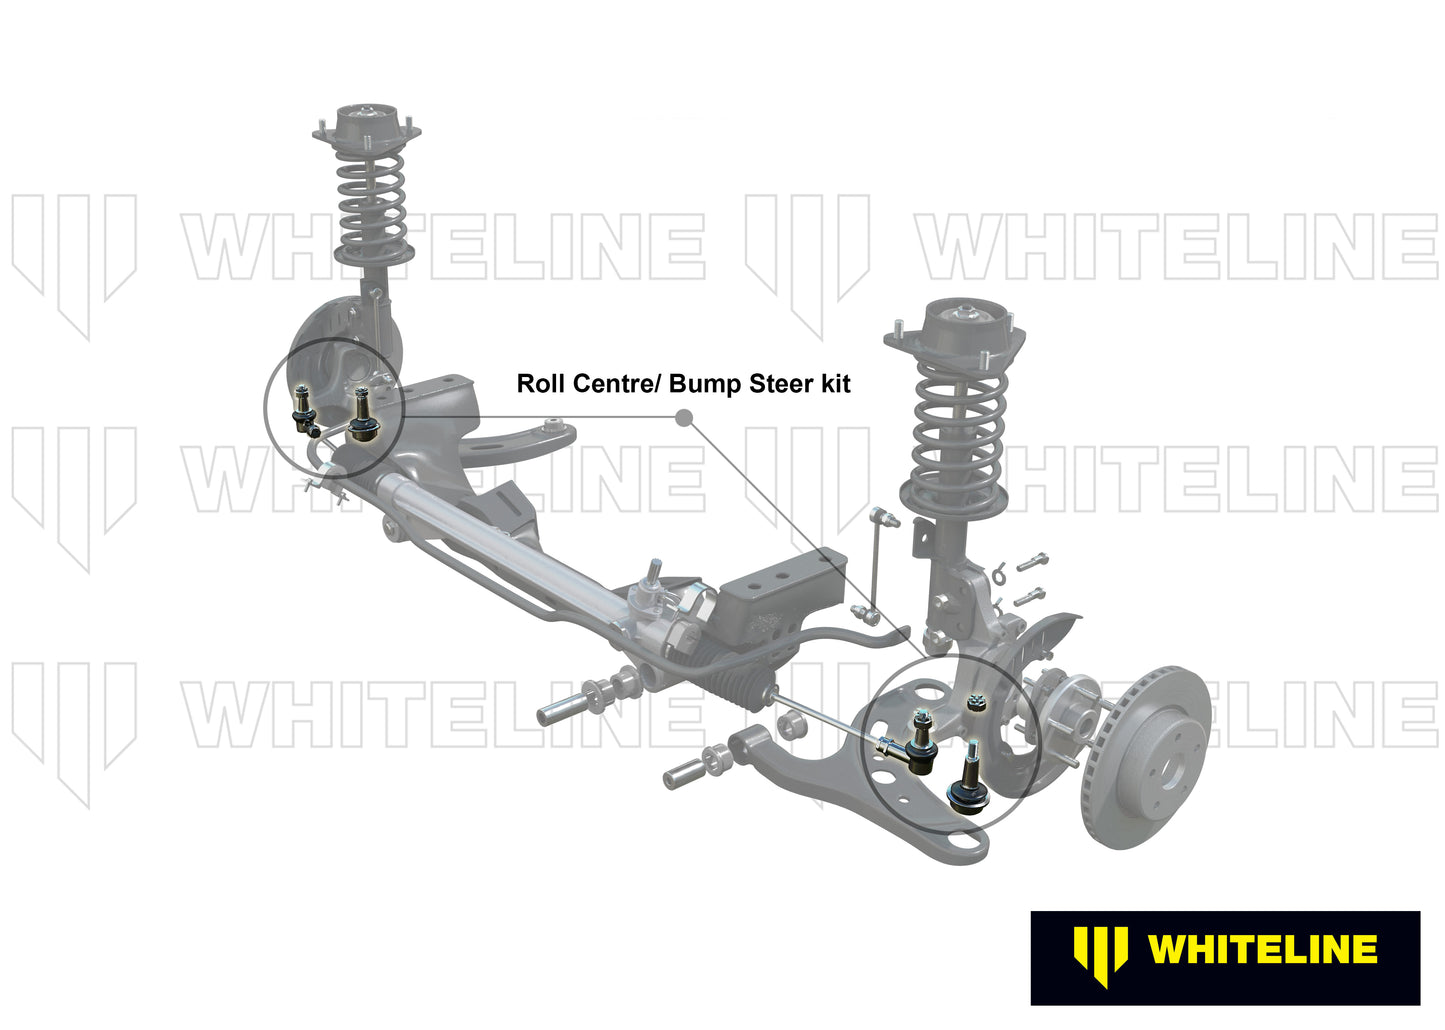 Roll Centre/Bump Steer - Correction Service Kit